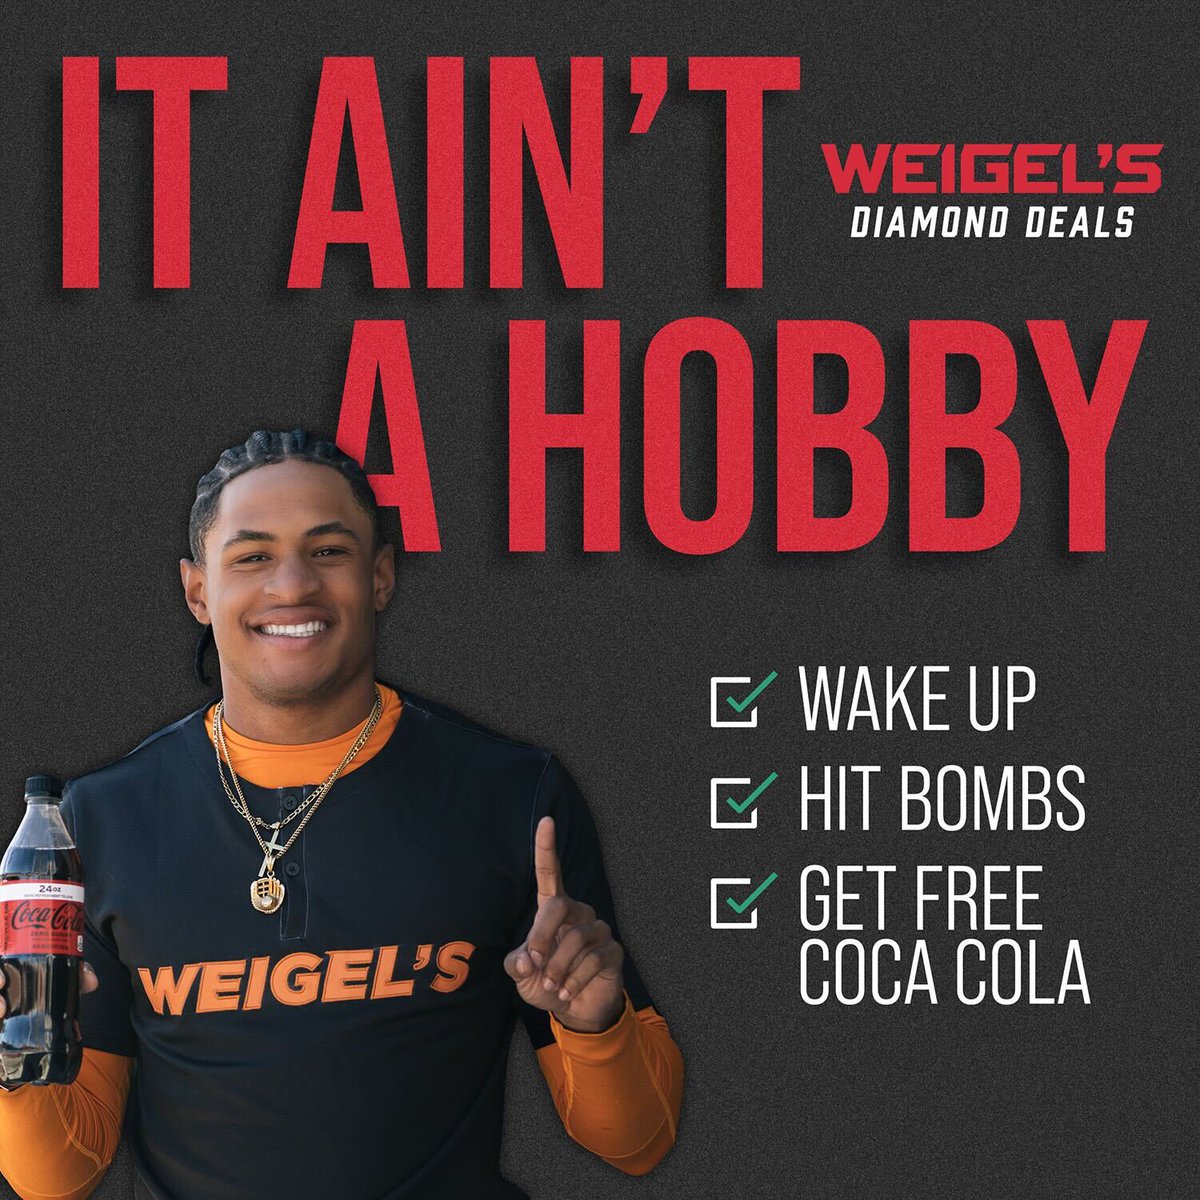 lol y'all tweeting at us like we don't already know. Get your free 24 oz coke tomorrow with your My Weigel’s Rewards card!